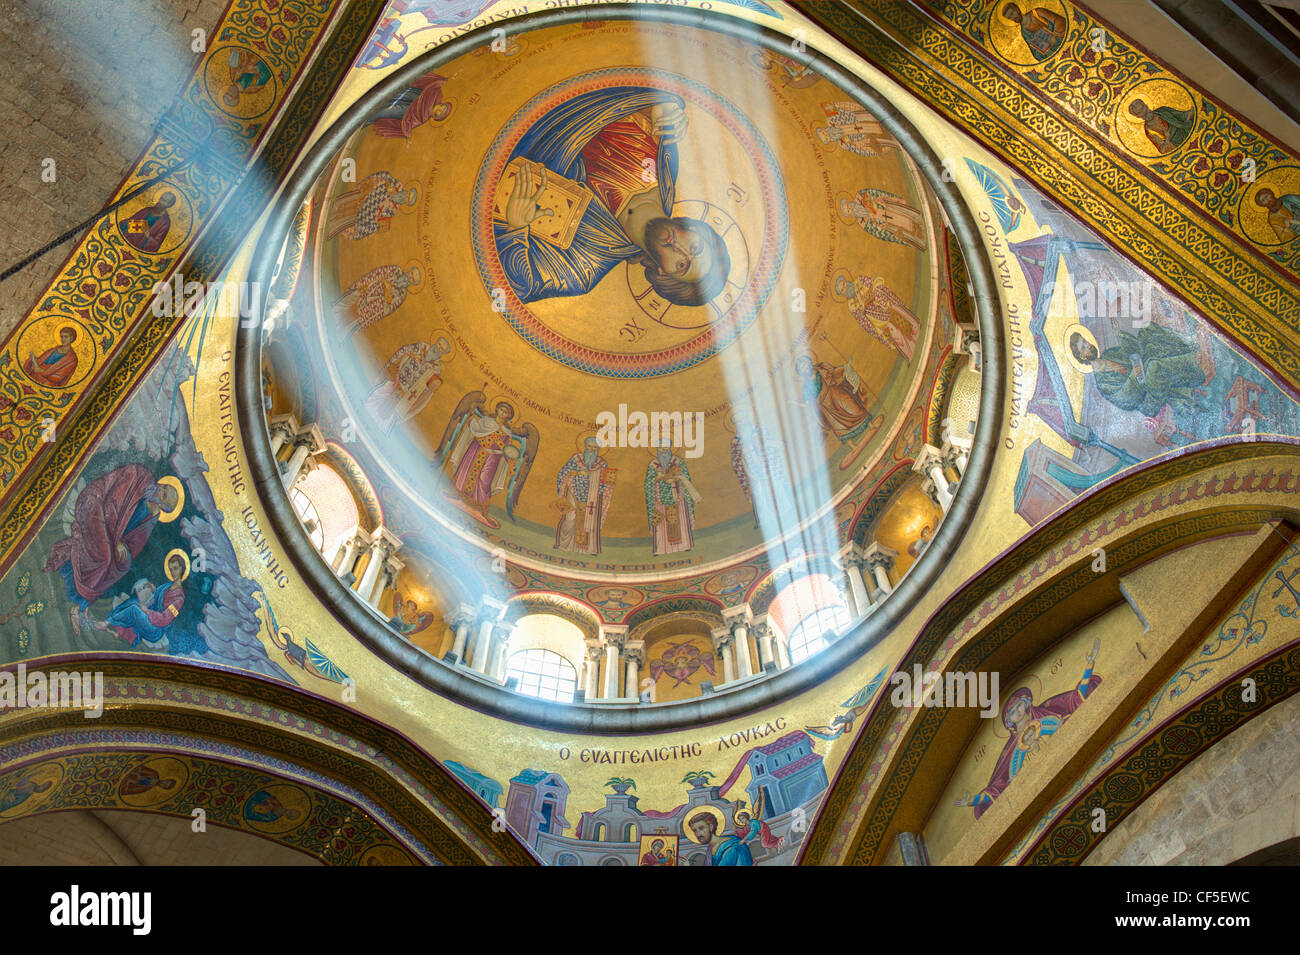 The dome of the Catholicon which the church at the center of the Church of the Holy Sepulchre in Jerusalem, Israel. Stock Photo